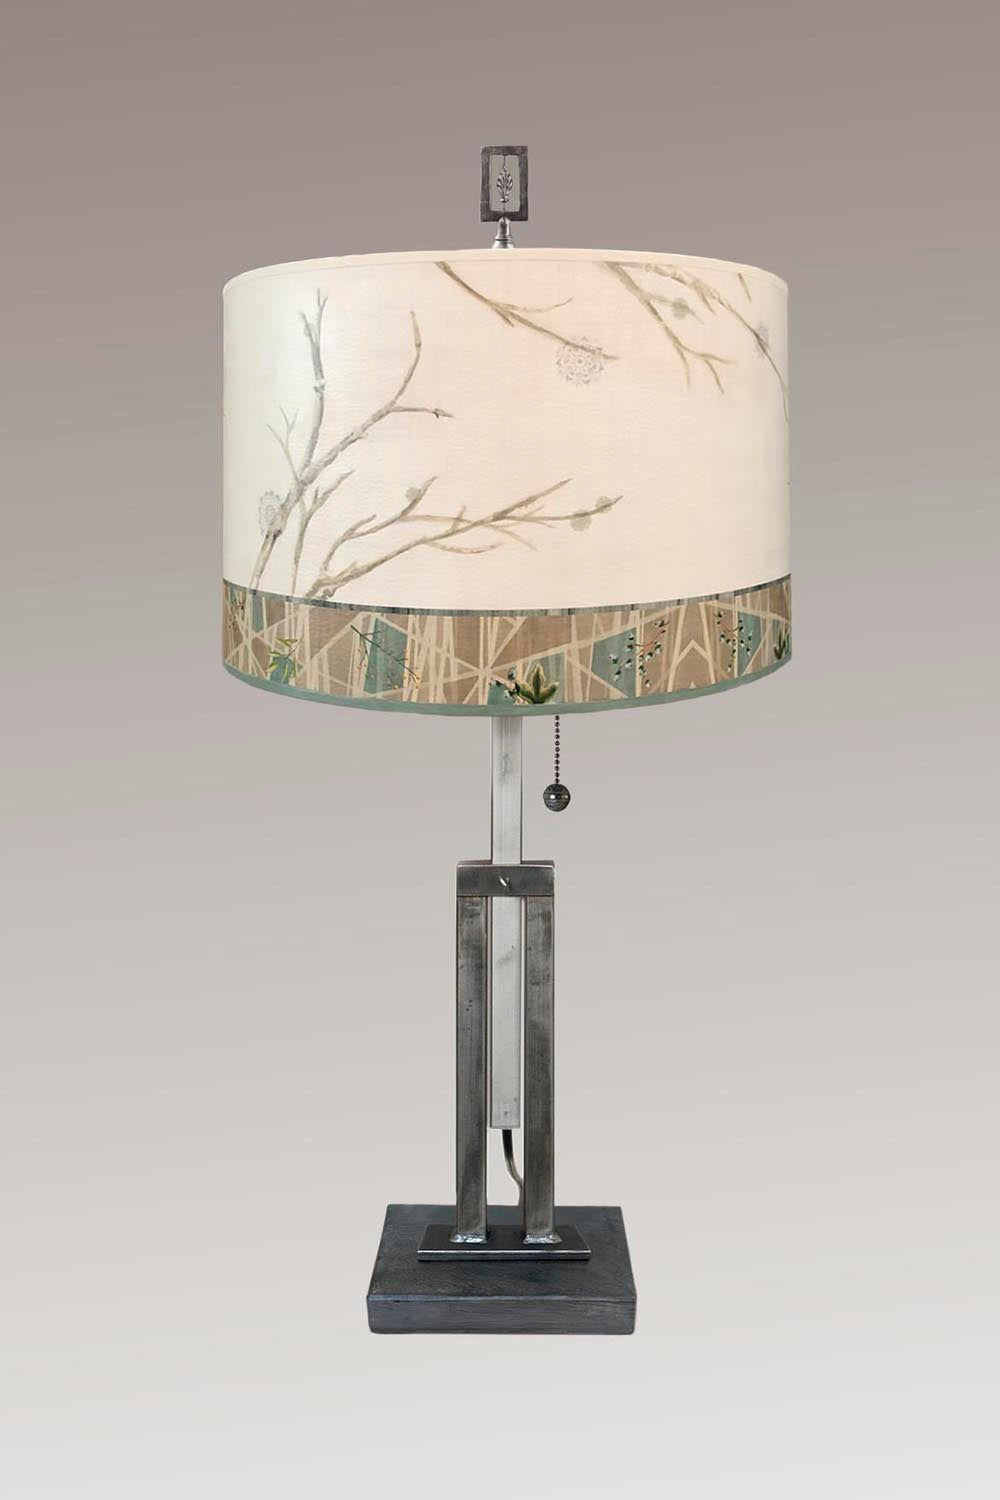 Janna Ugone & Co Table Lamps Adjustable-Height Steel Table Lamp with Large Drum Shade in Prism Branch